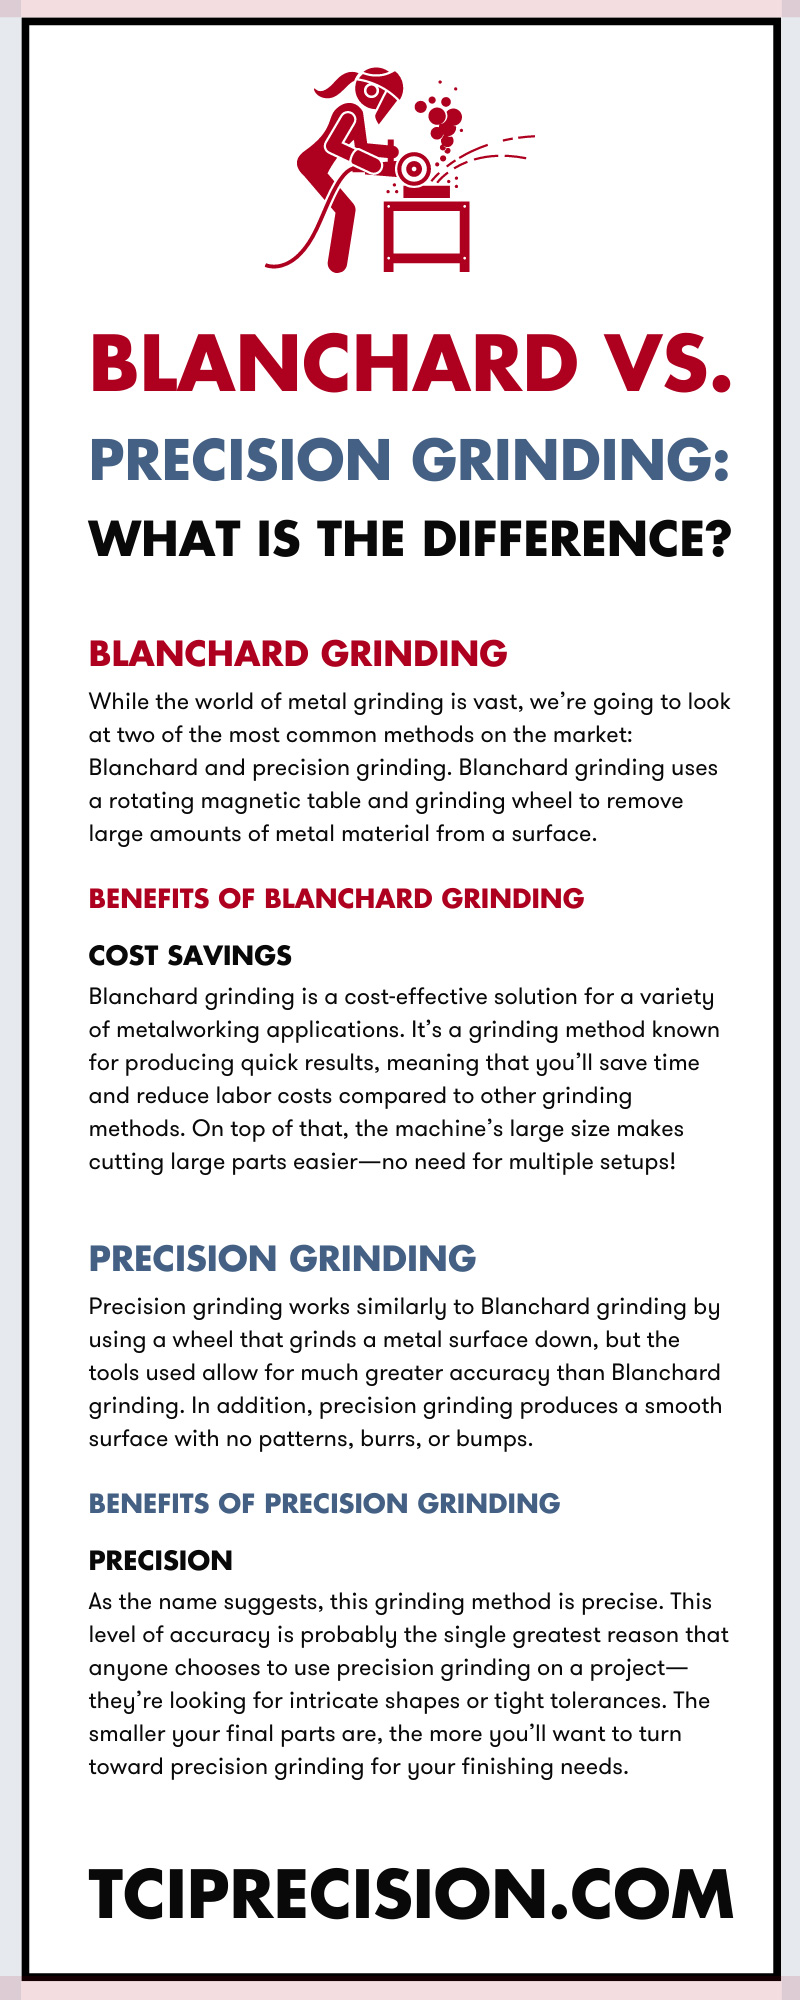 Blanchard vs. Precision Grinding: What Is the Difference?